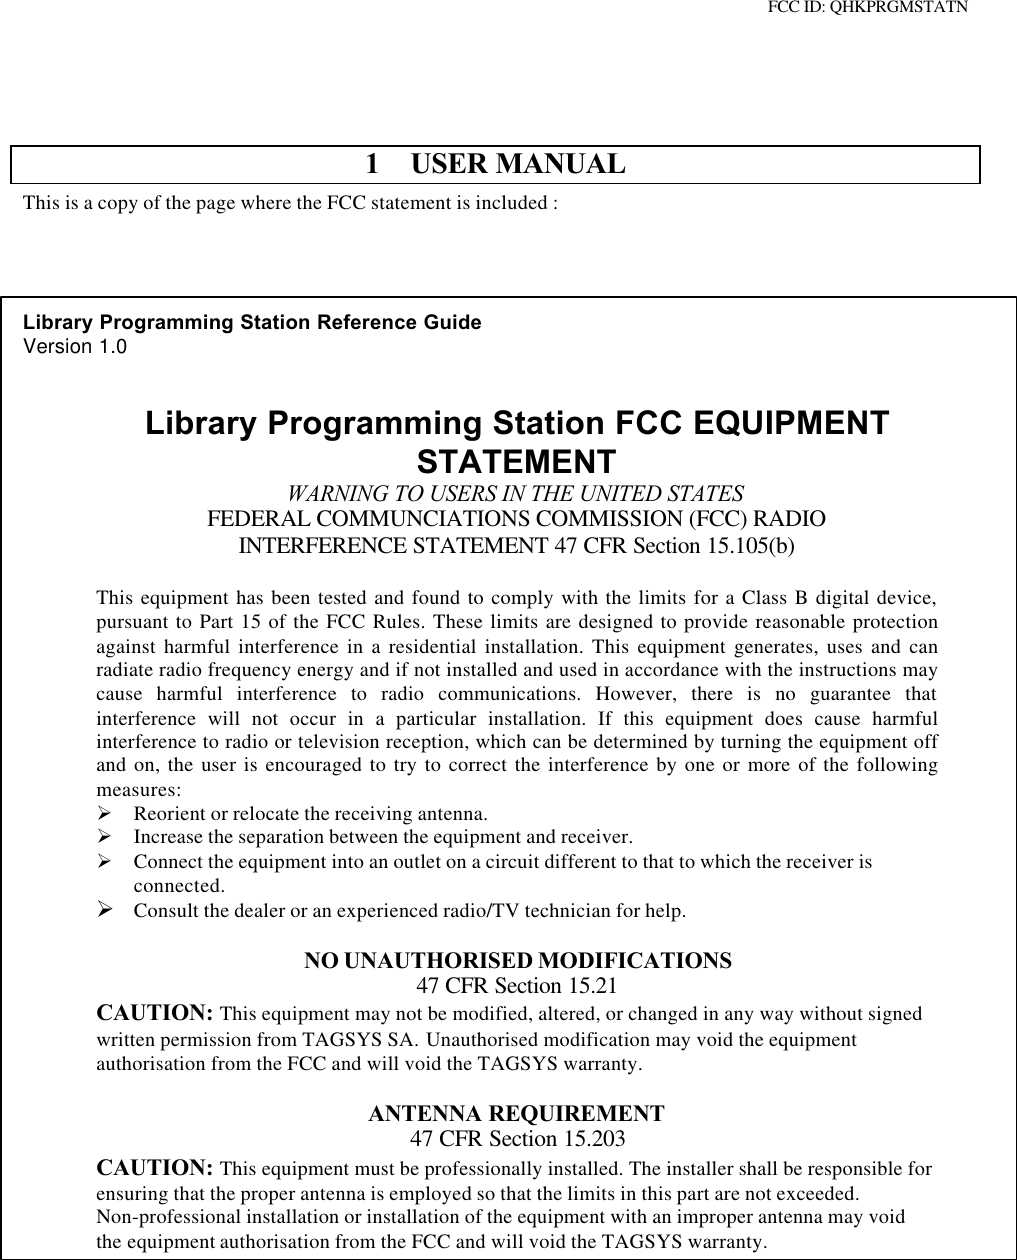 FCC ID: QHKPRGMSTATN1 USER MANUALThis is a copy of the page where the FCC statement is included :Library Programming Station Reference GuideVersion 1.0Library Programming Station FCC EQUIPMENTSTATEMENTWARNING TO USERS IN THE UNITED STATESFEDERAL COMMUNCIATIONS COMMISSION (FCC) RADIOINTERFERENCE STATEMENT 47 CFR Section 15.105(b)This equipment has been tested and found to comply with the limits for a Class B digital device,pursuant to Part 15 of the FCC Rules. These limits are designed to provide reasonable protectionagainst harmful interference in a residential installation. This equipment generates, uses and canradiate radio frequency energy and if not installed and used in accordance with the instructions maycause harmful interference to radio communications. However, there is no guarantee thatinterference will not occur in a particular installation. If this equipment does cause harmfulinterference to radio or television reception, which can be determined by turning the equipment offand on, the user is encouraged to try to correct the interference by one or more of the followingmeasures:Ø Reorient or relocate the receiving antenna.Ø Increase the separation between the equipment and receiver.Ø Connect the equipment into an outlet on a circuit different to that to which the receiver isconnected.Ø Consult the dealer or an experienced radio/TV technician for help.NO UNAUTHORISED MODIFICATIONS47 CFR Section 15.21CAUTION: This equipment may not be modified, altered, or changed in any way without signedwritten permission from TAGSYS SA. Unauthorised modification may void the equipmentauthorisation from the FCC and will void the TAGSYS warranty.ANTENNA REQUIREMENT47 CFR Section 15.203CAUTION: This equipment must be professionally installed. The installer shall be responsible forensuring that the proper antenna is employed so that the limits in this part are not exceeded.Non-professional installation or installation of the equipment with an improper antenna may voidthe equipment authorisation from the FCC and will void the TAGSYS warranty.